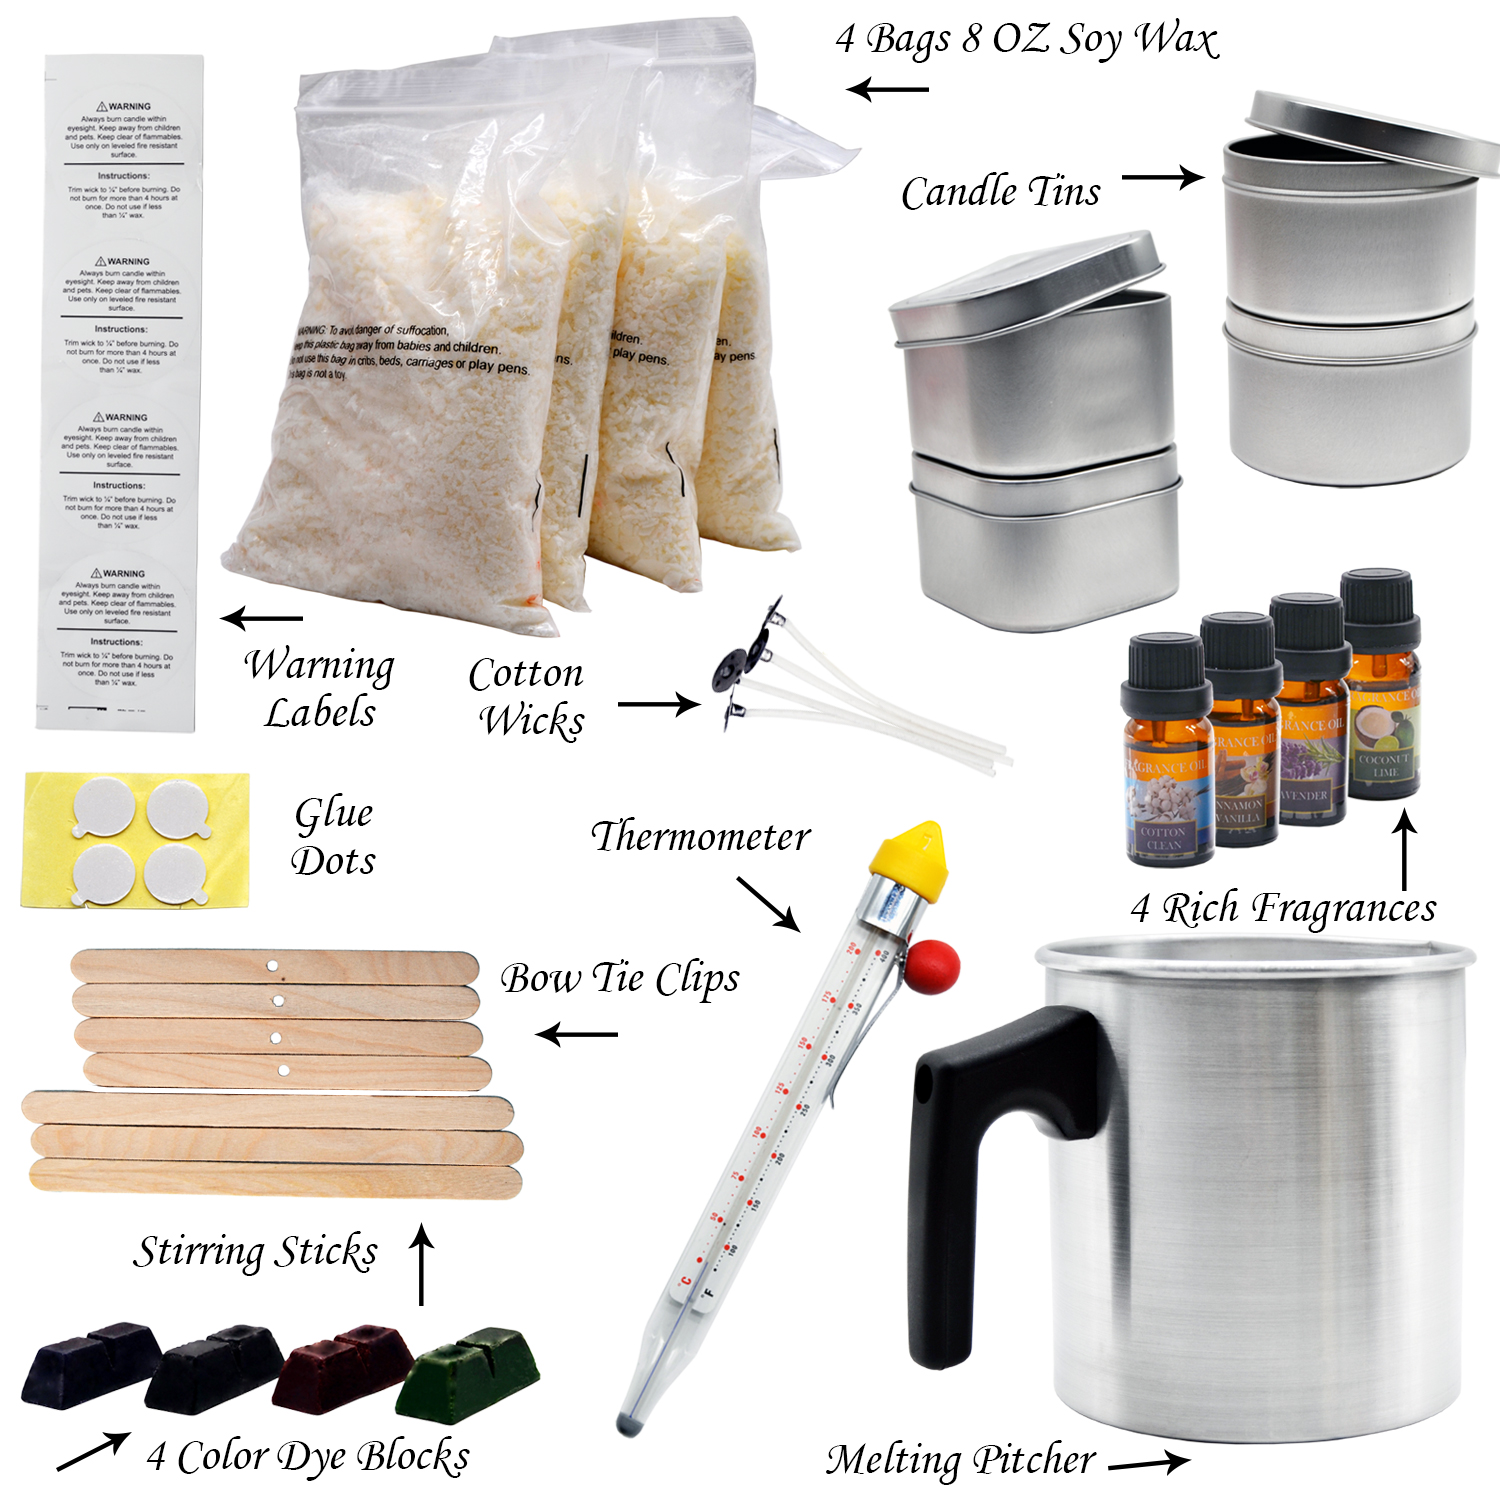 Candle Making Kit, Soy Wax Flakes, Wicks, Pitcher, Fragrances, Two Tins